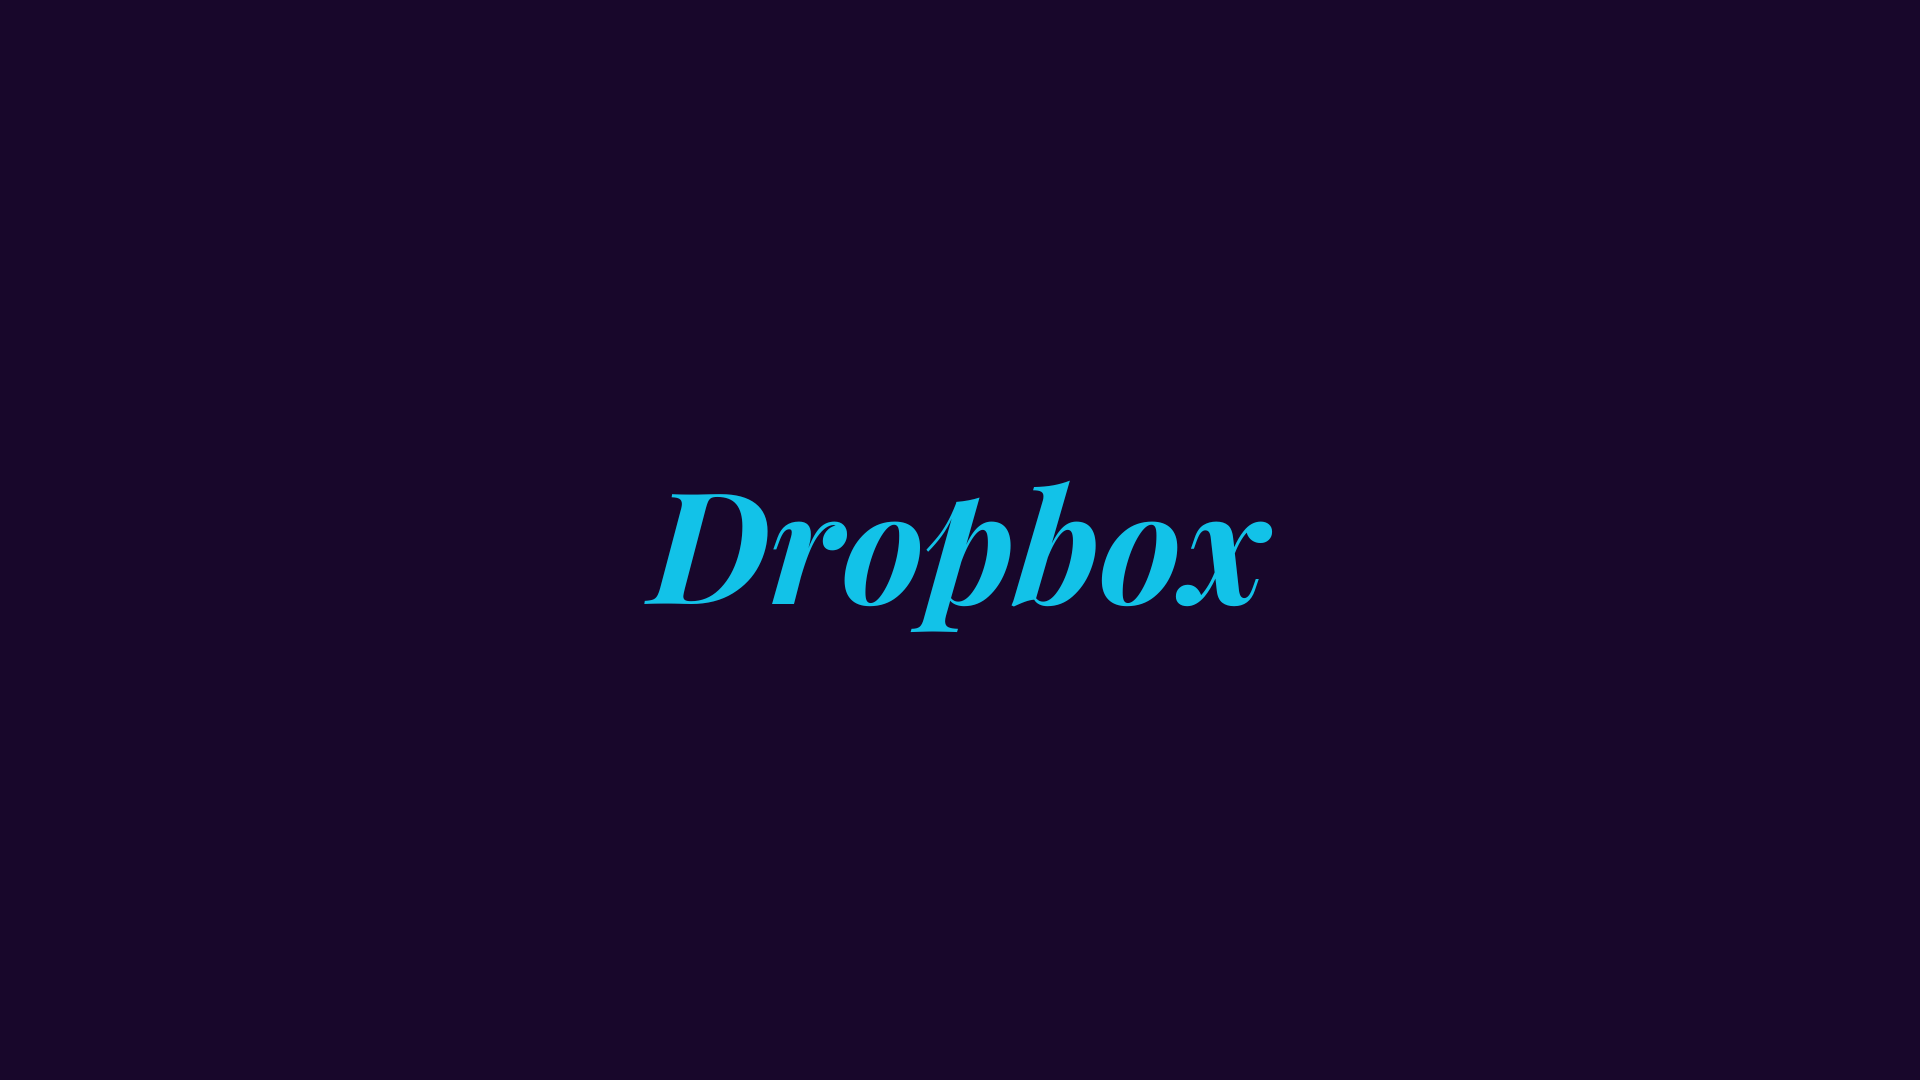 How to Install and Setup Dropbox on Arch Linux?